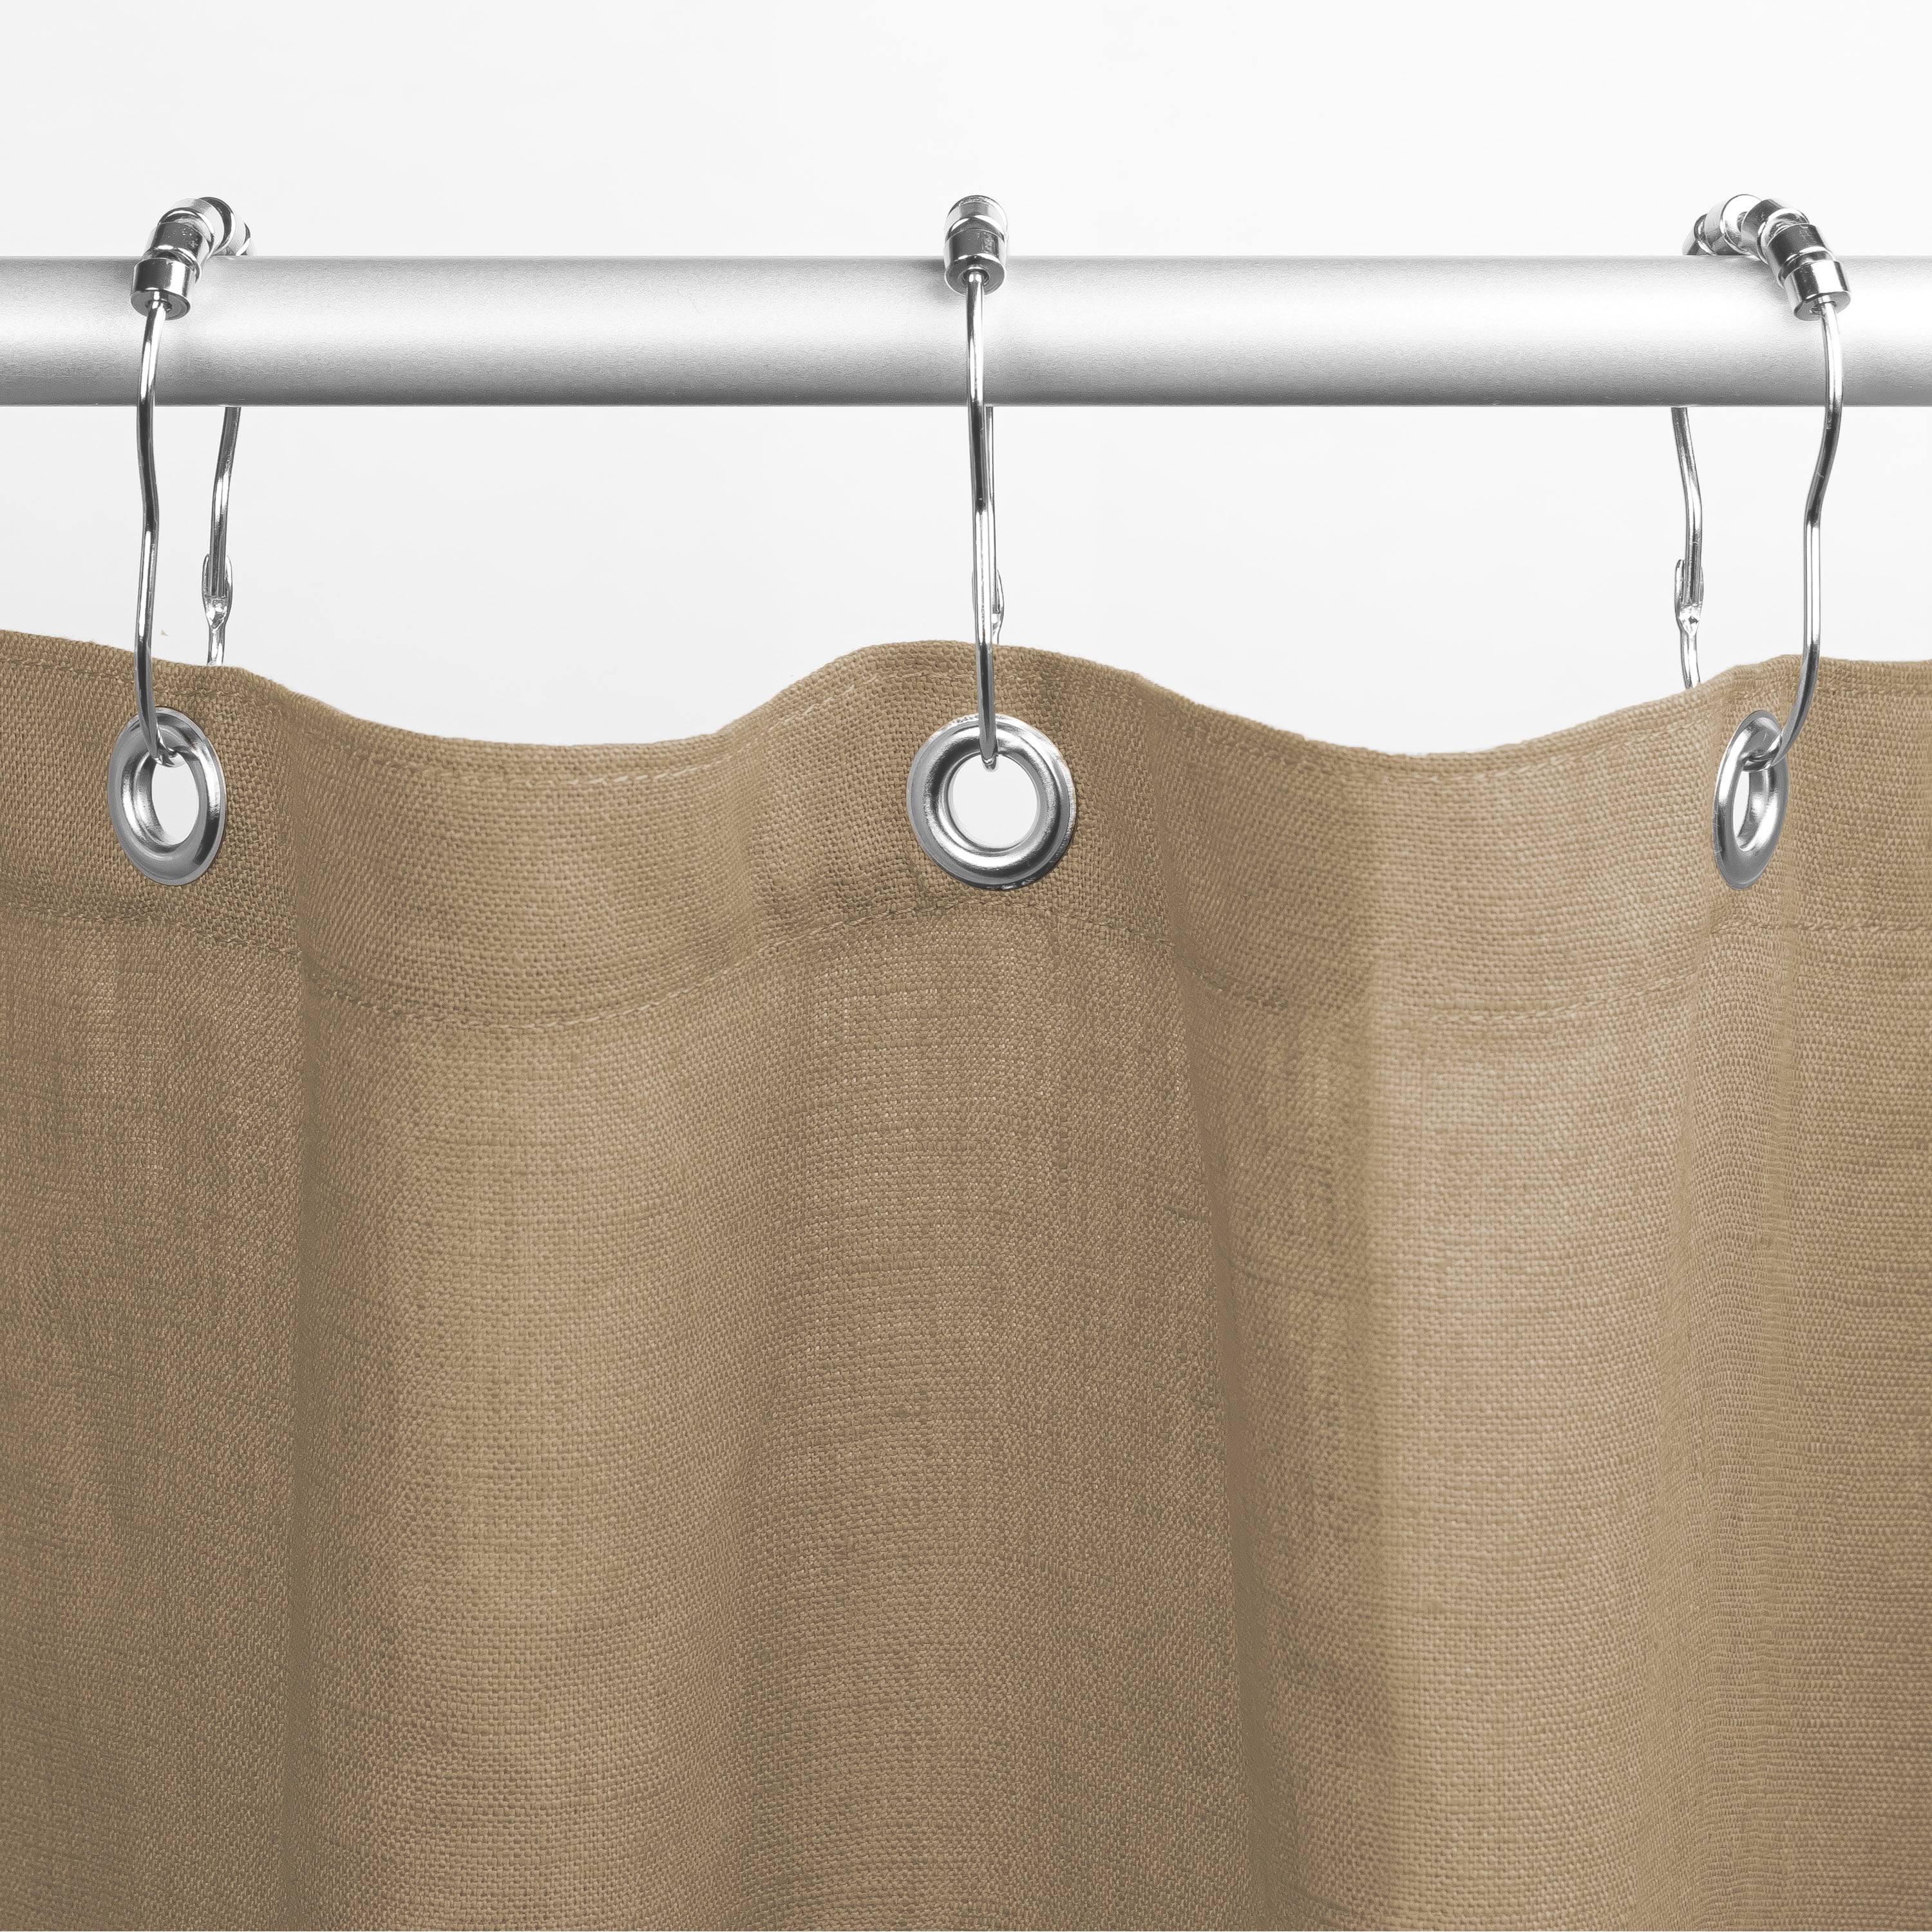 Tub Bath And Stall Showers, How To Measure For A Stall Shower Curtain